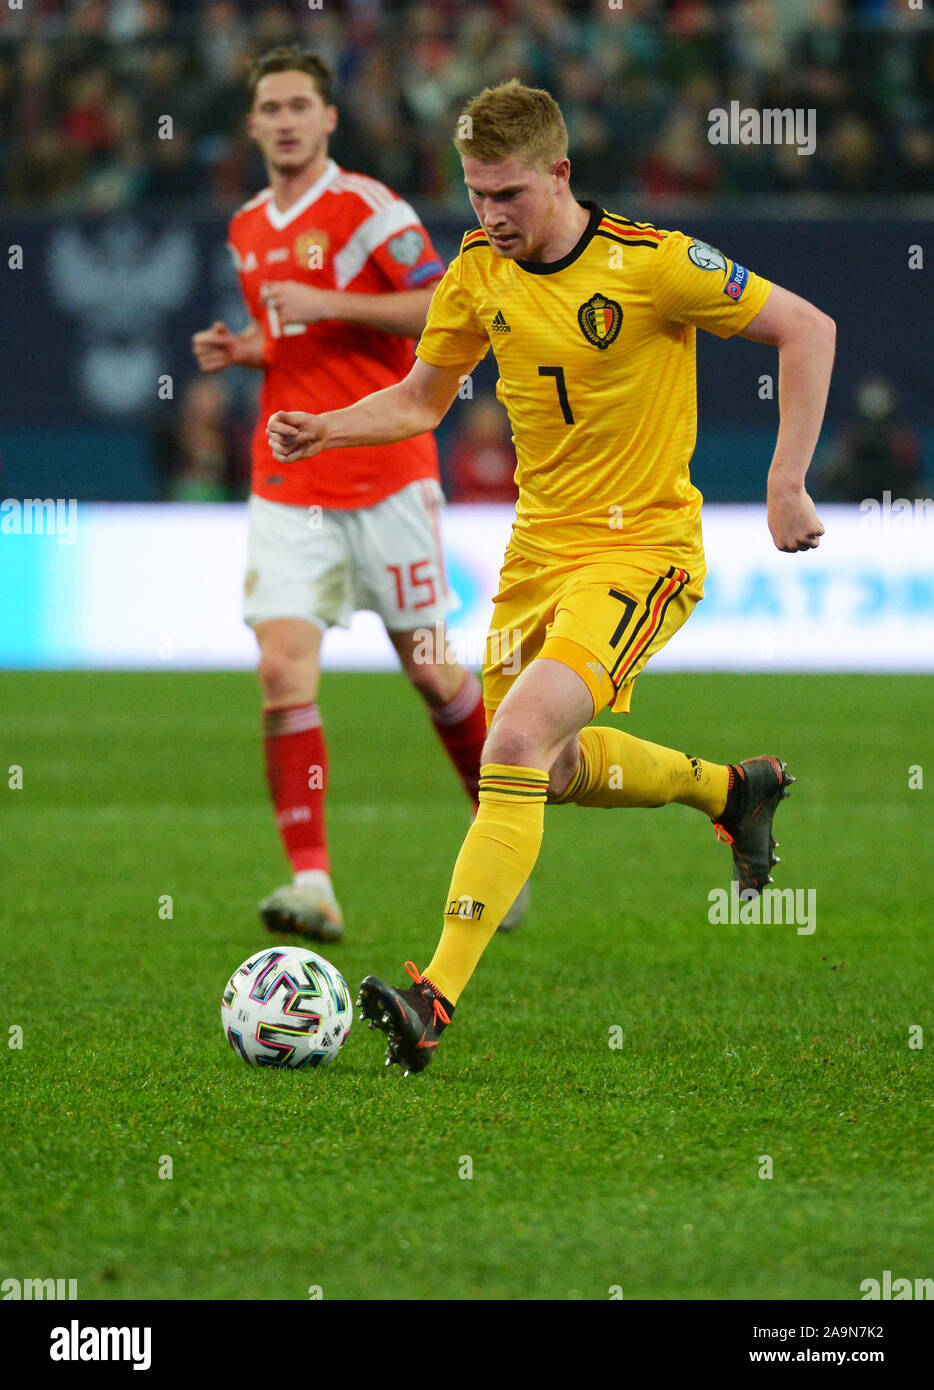 St. Petersburg, Russia. 16th Nov, 2019. Russia, St. Petersburg, November 16, 2019. Belgian national team players Kevin De Bruyne in the qualifying match of the 2020 European Football Championship between the national teams of Russia and Belgium. Credit: Andrey Pronin/ZUMA Wire/Alamy Live News Stock Photo